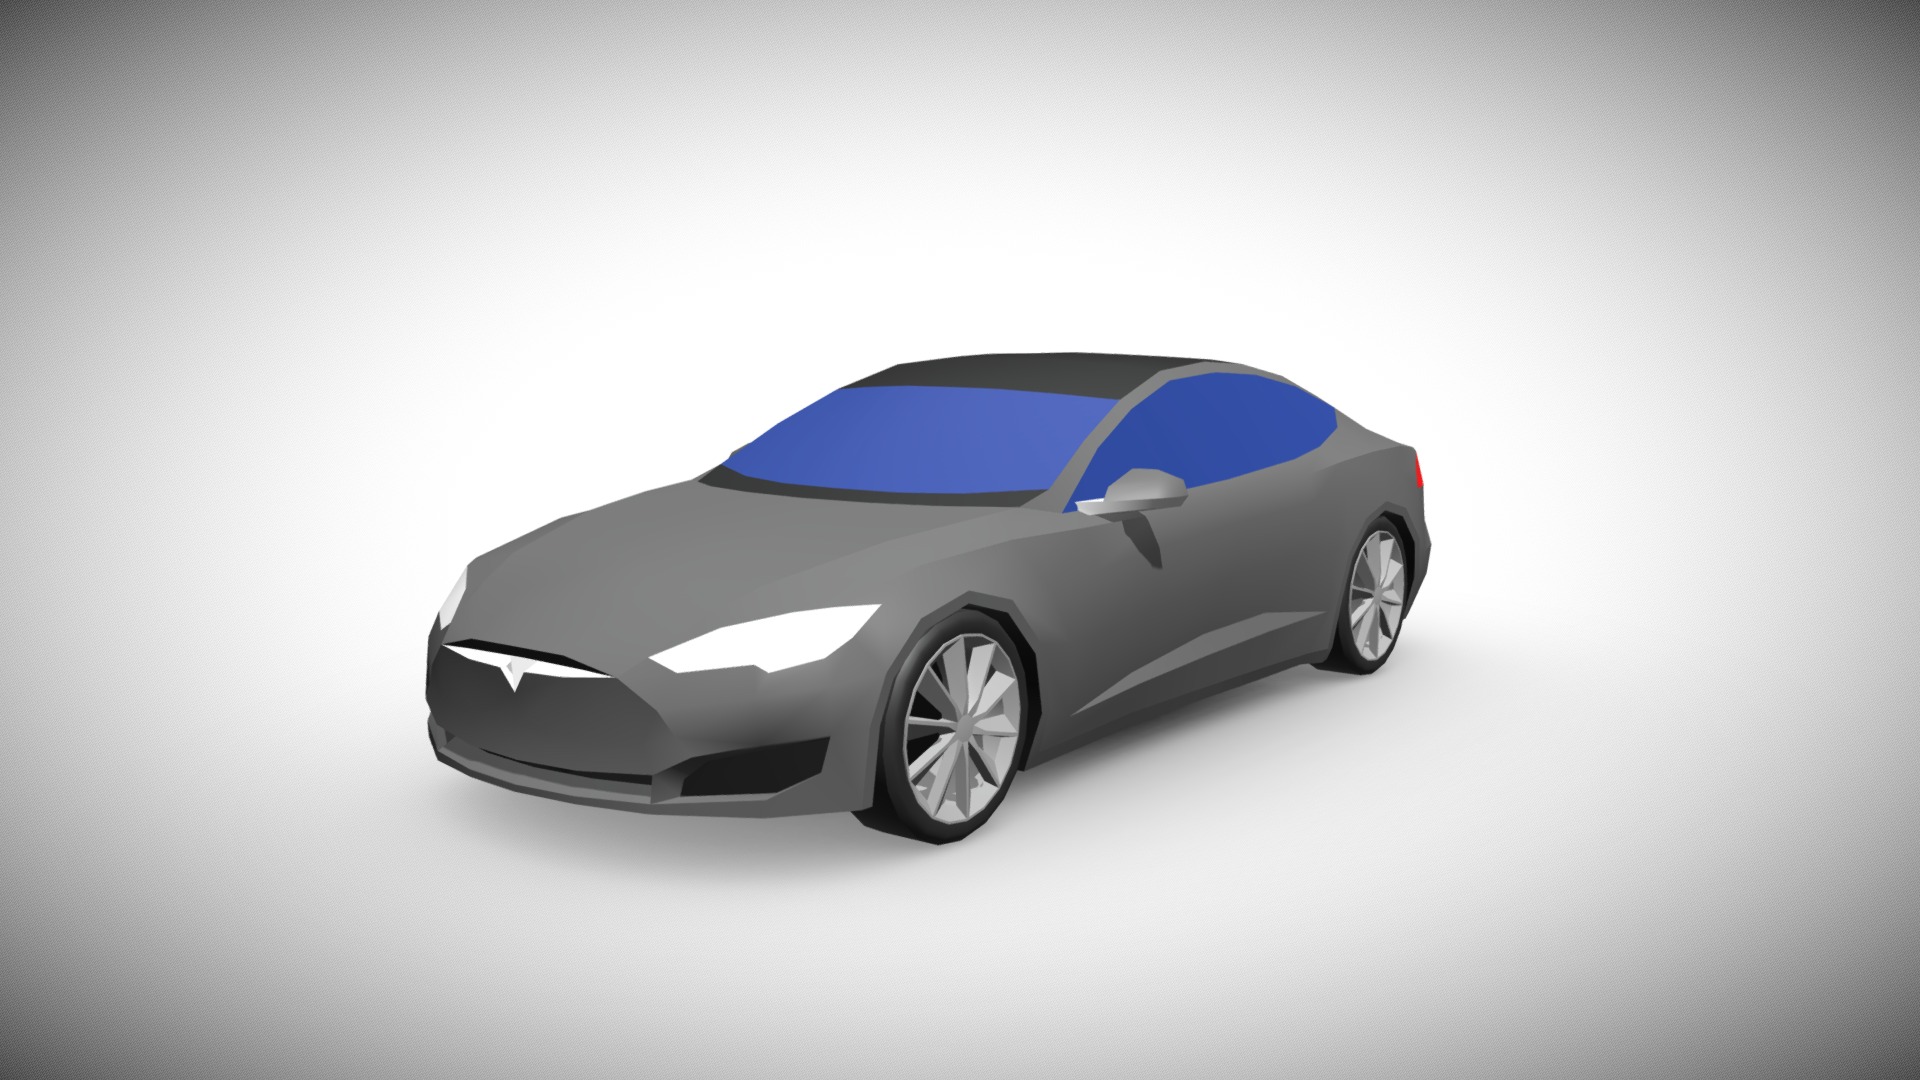 3D model Low-Poly Tesla Model S - This is a 3D model of the Low-Poly Tesla Model S. The 3D model is about a silver sports car.